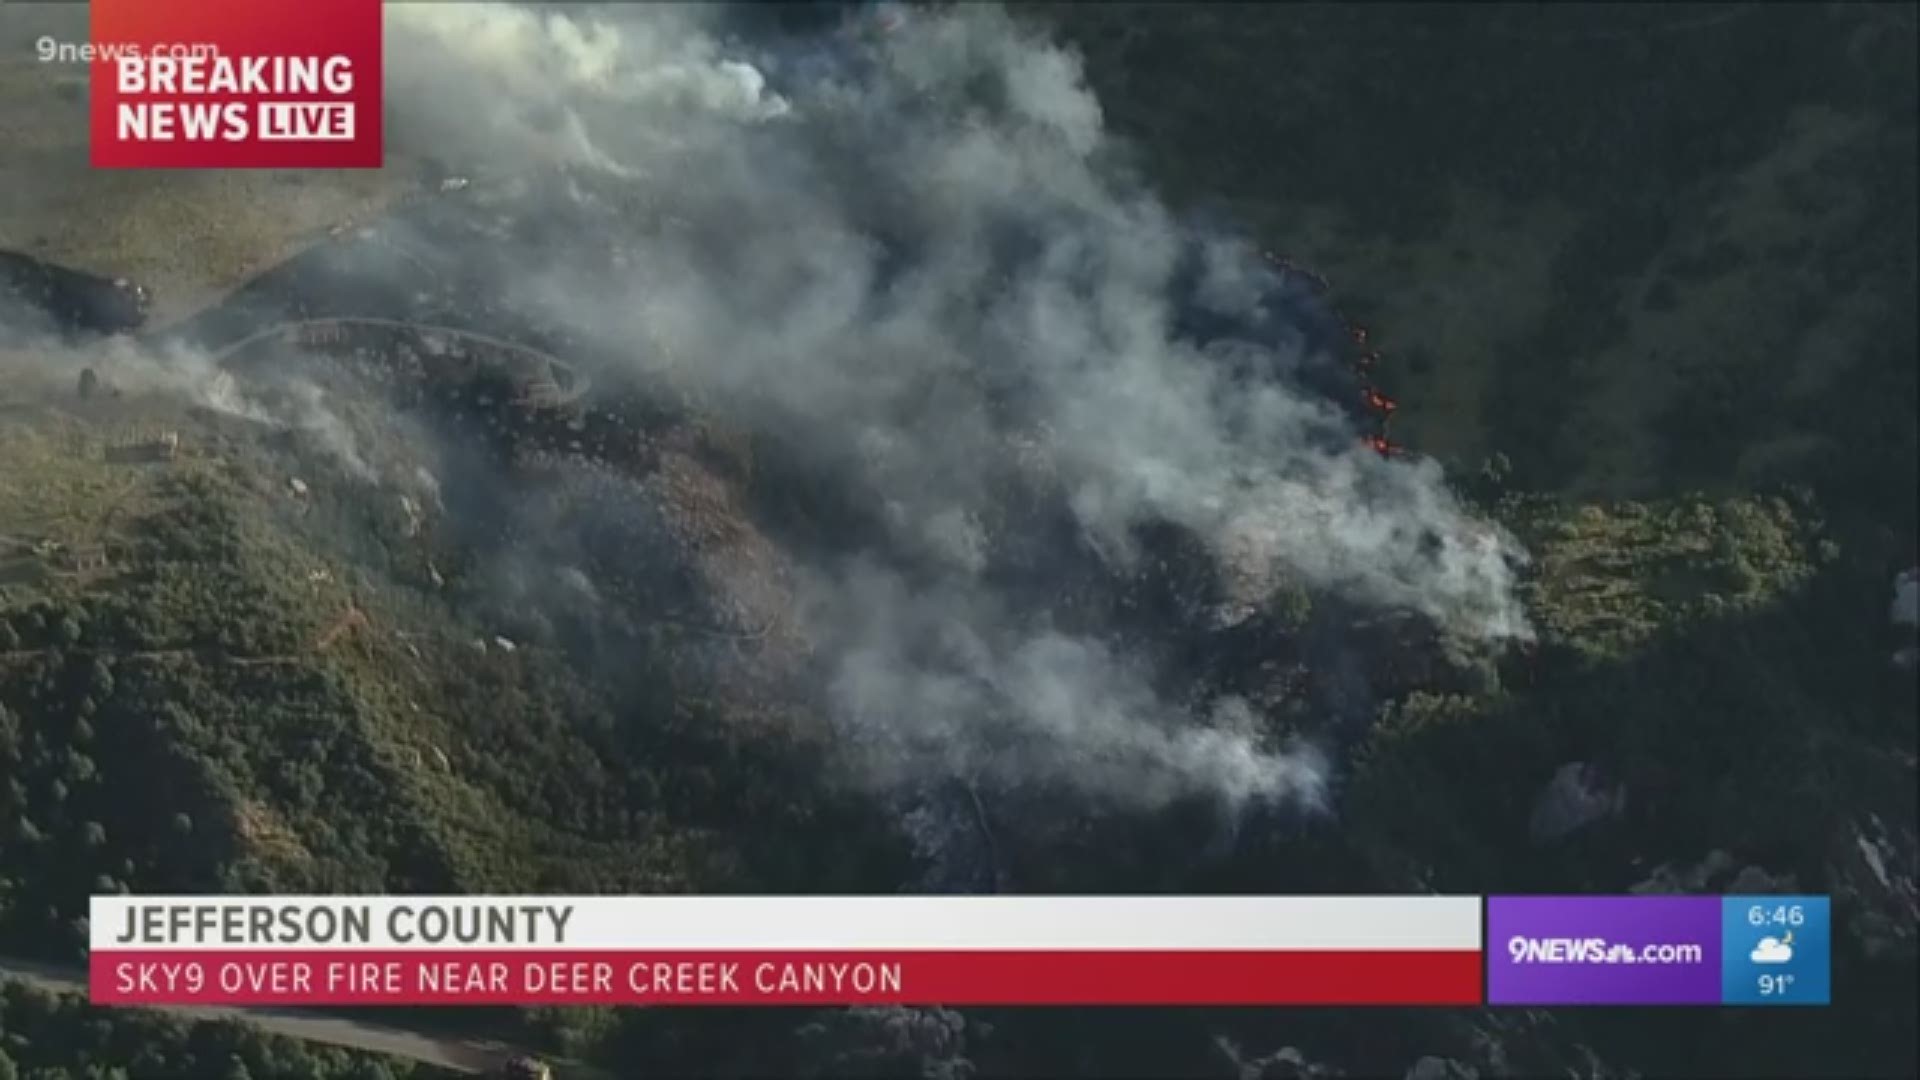 South Valley Park, Hildebrand Ranch Park and Deer Creek Canyon Park are all closed because of the fire,